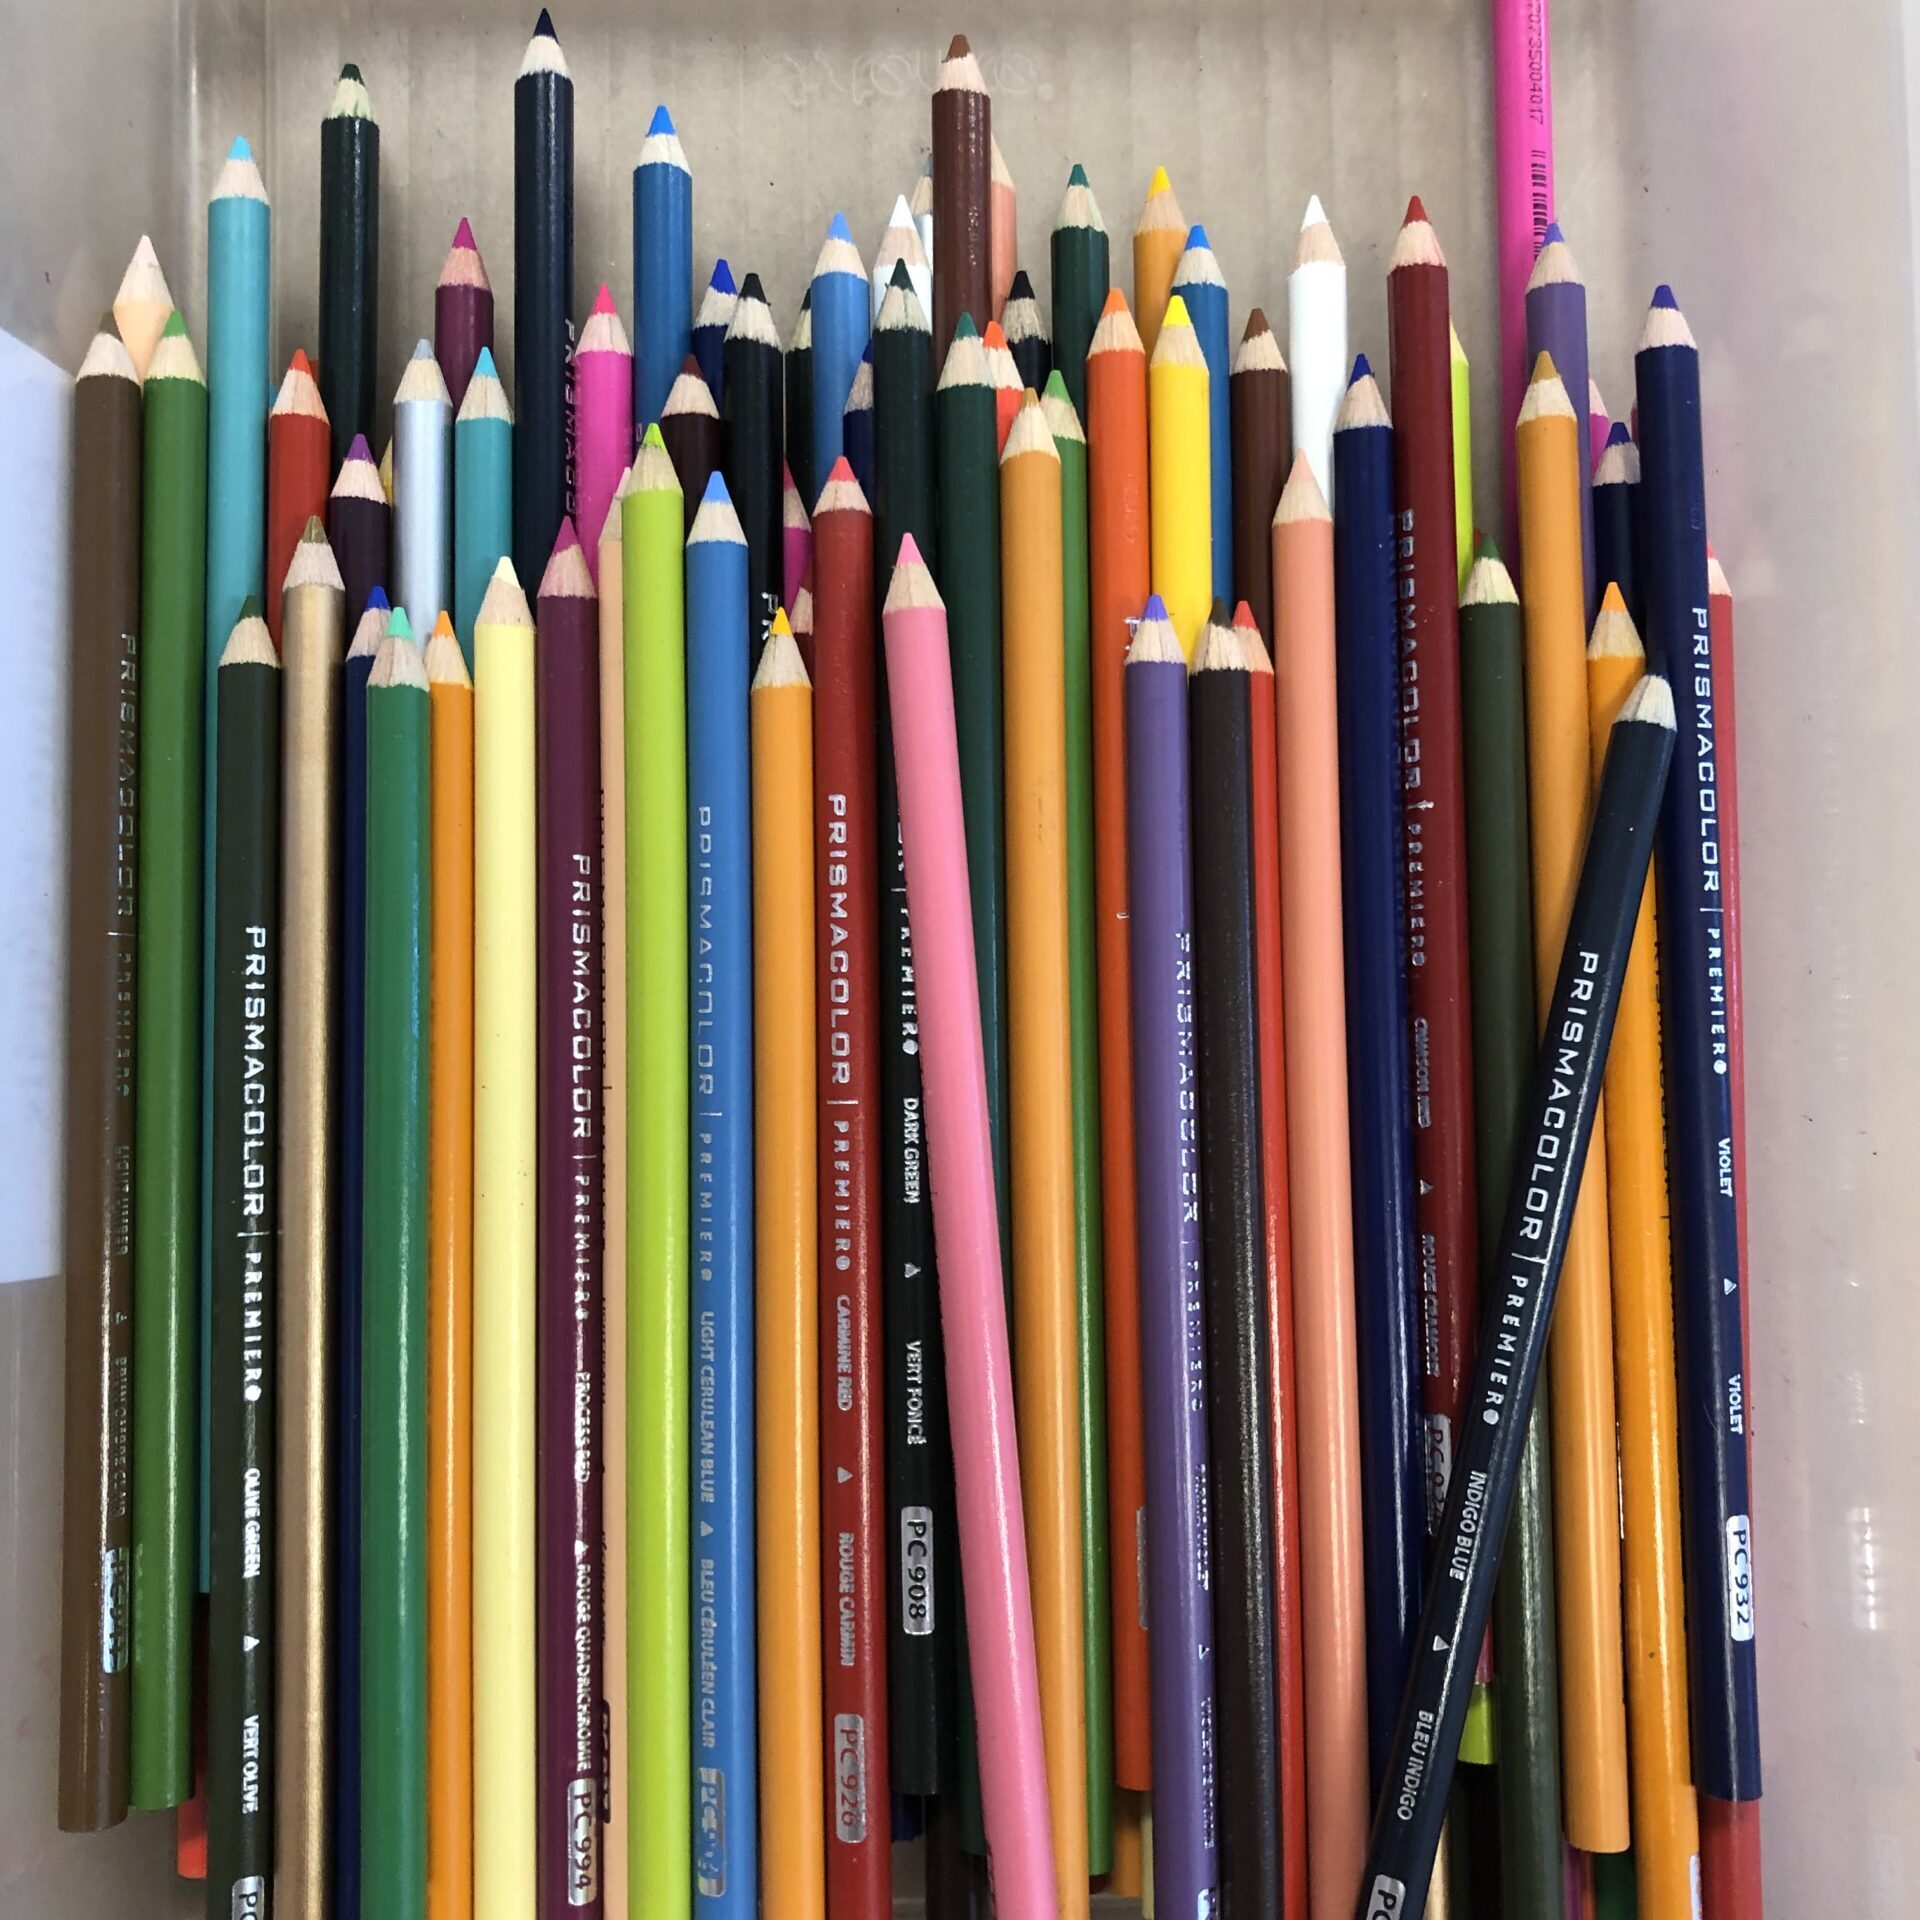 Newly sharpened colored pencils in all different colors in vertical orientation